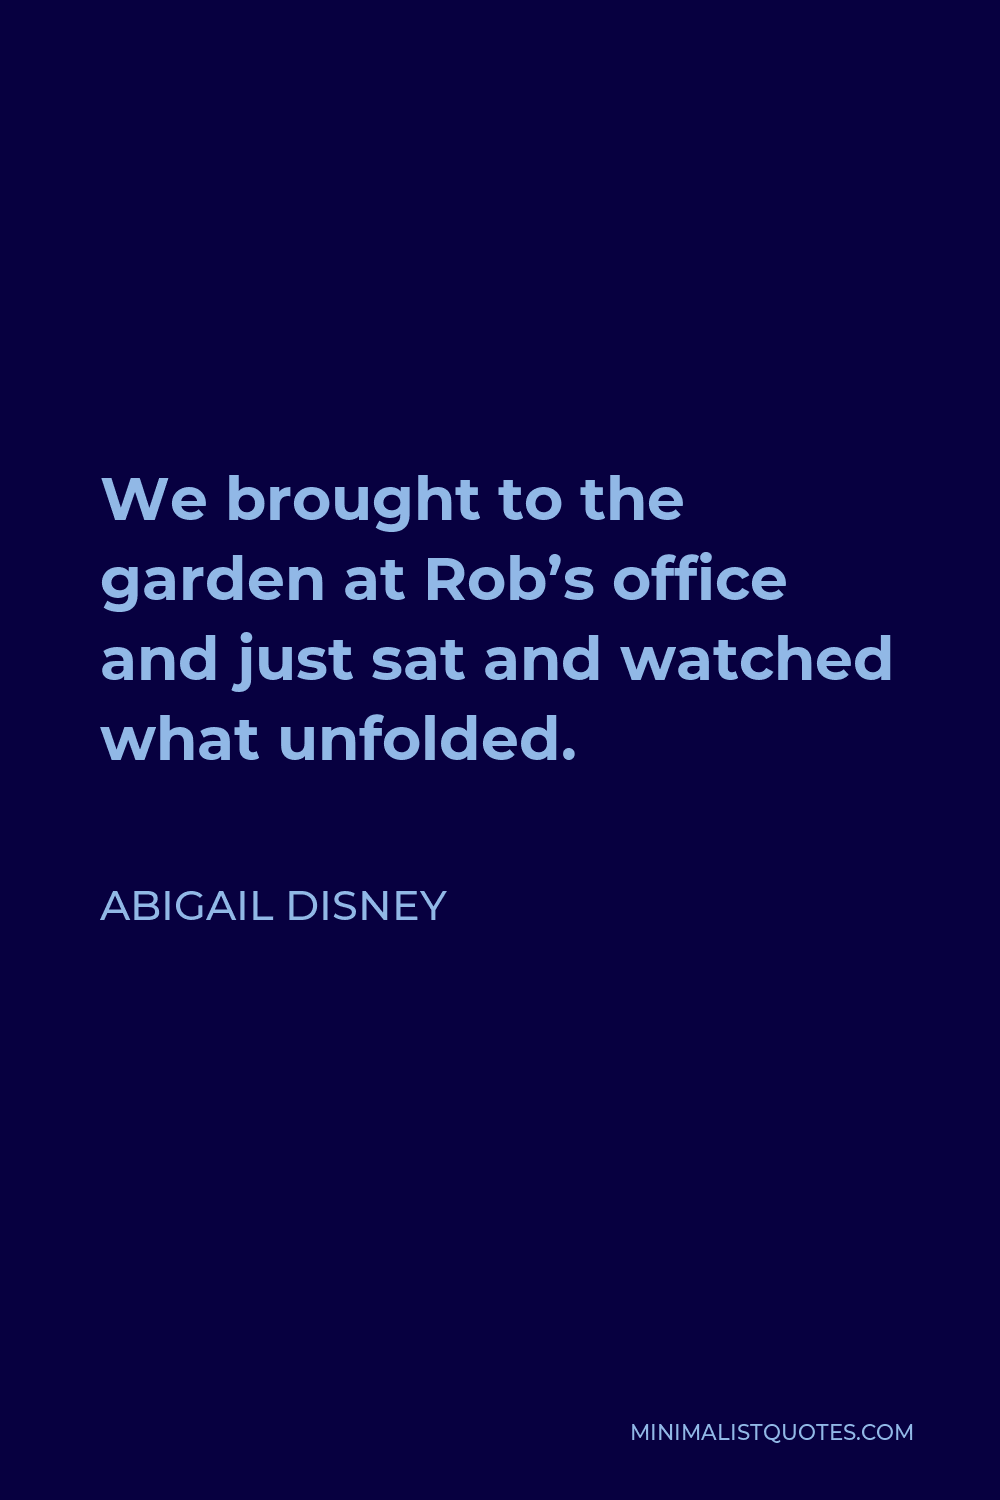 Abigail Disney Quote - We brought to the garden at Rob’s office and just sat and watched what unfolded.